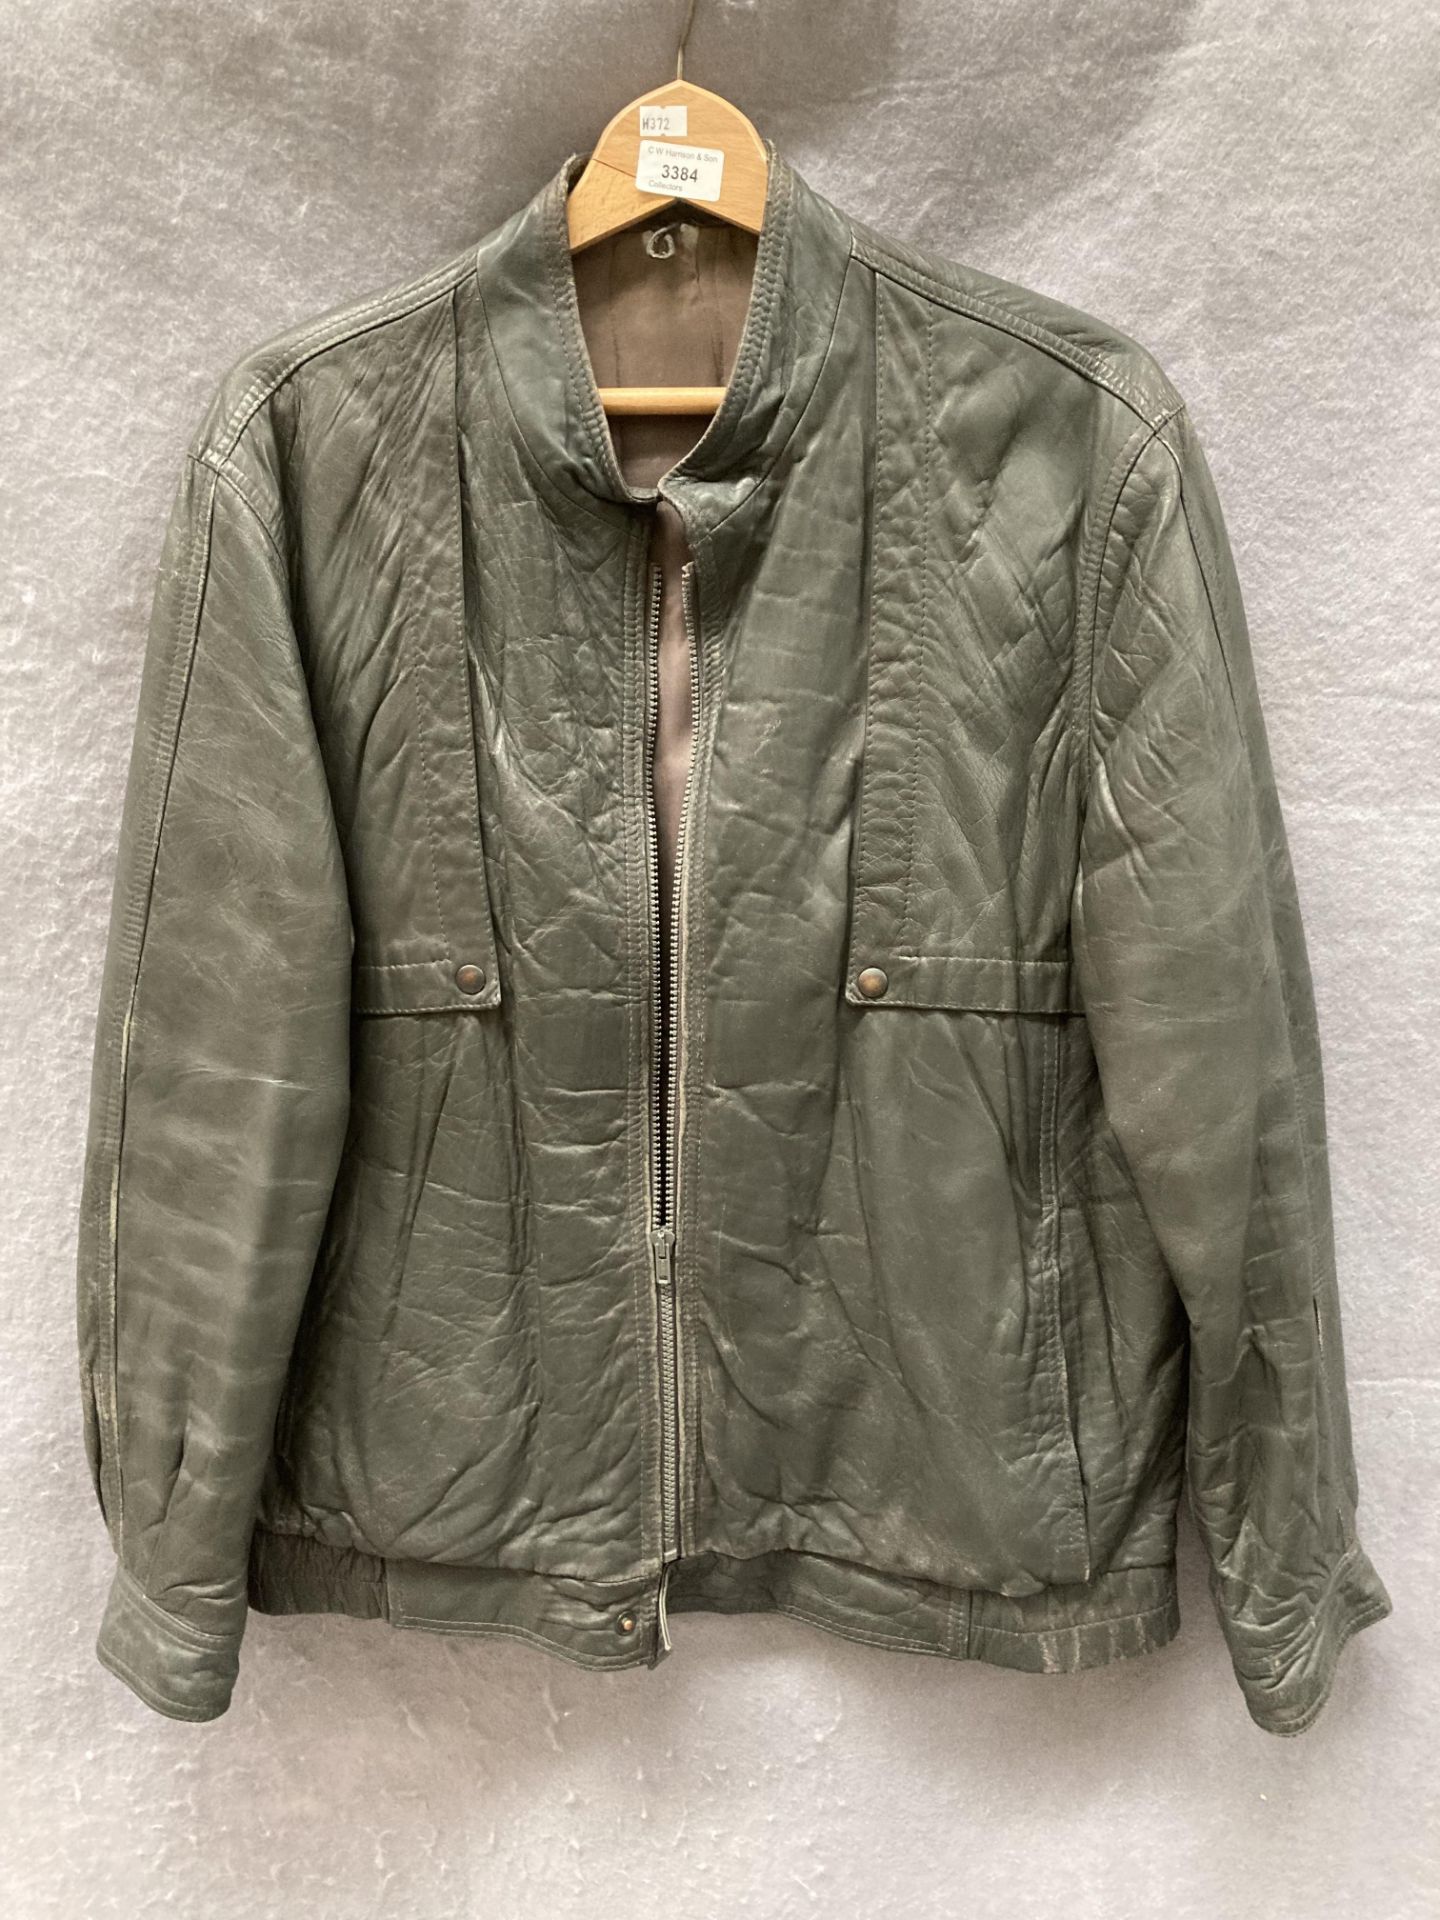 A St Michael's grey leather jacket,